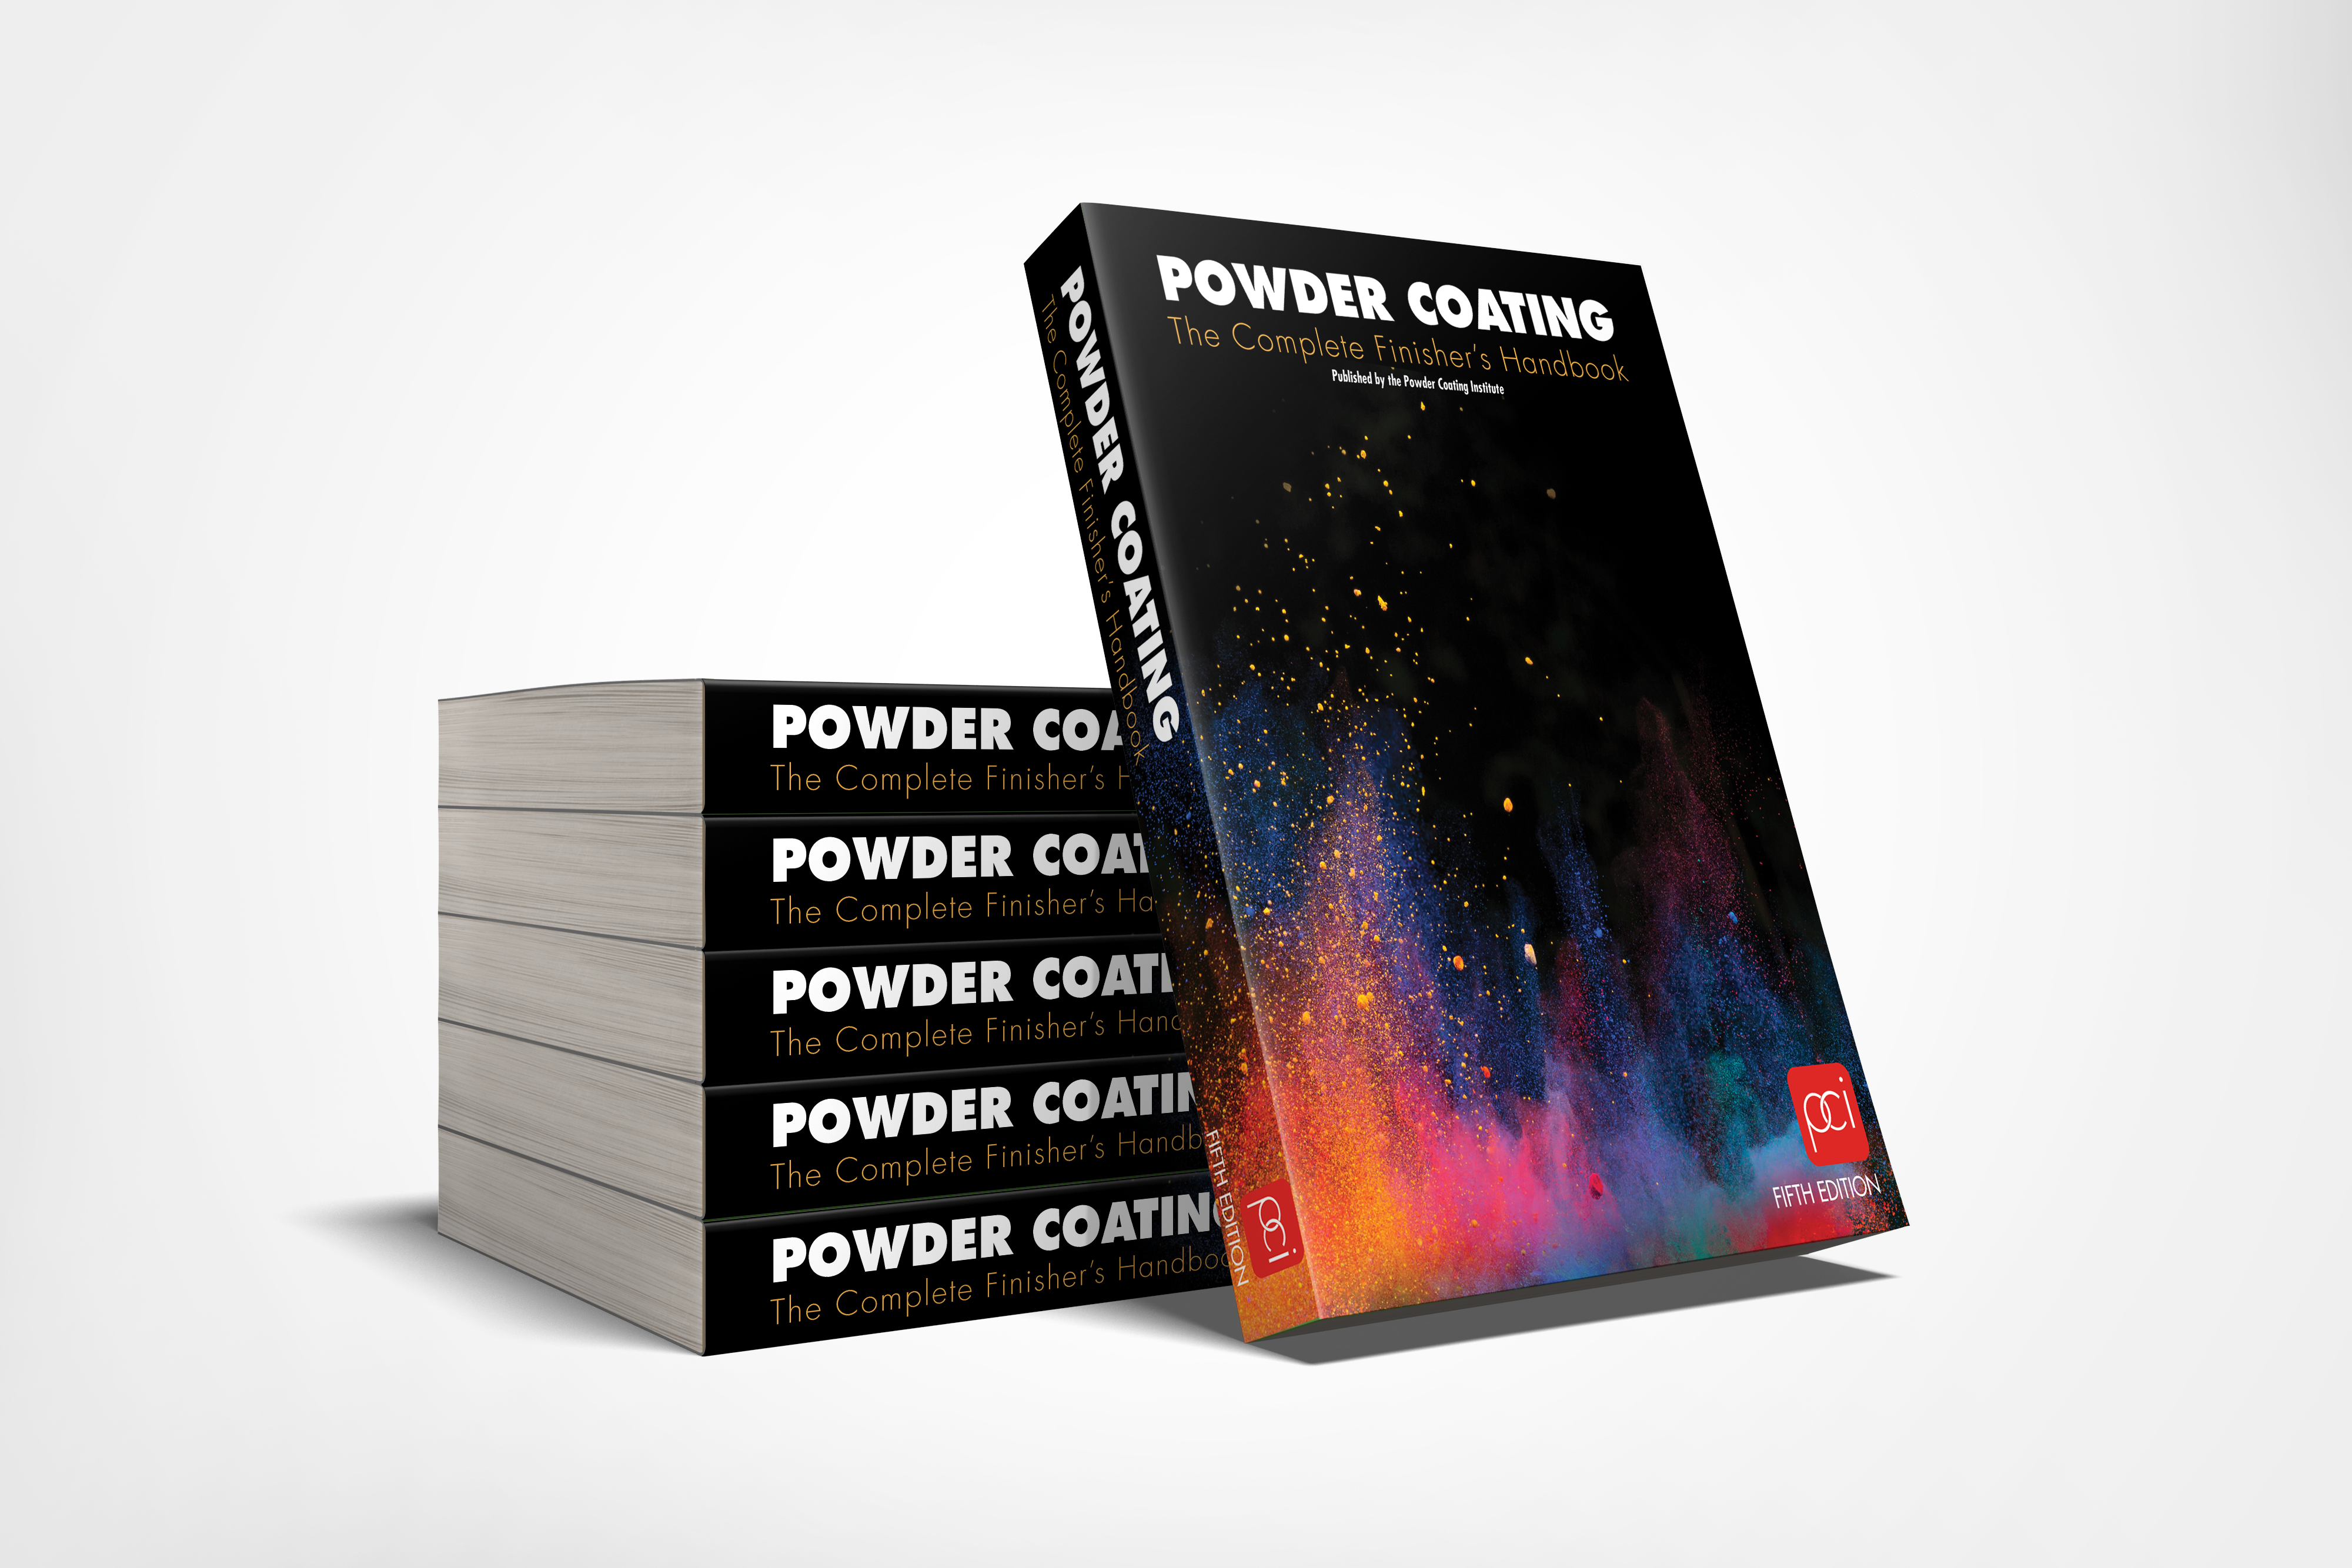 The Powder Coating Institute (PCI) has released the fifth edition of Powder Coating: The Complete Finisher’s Handbook.